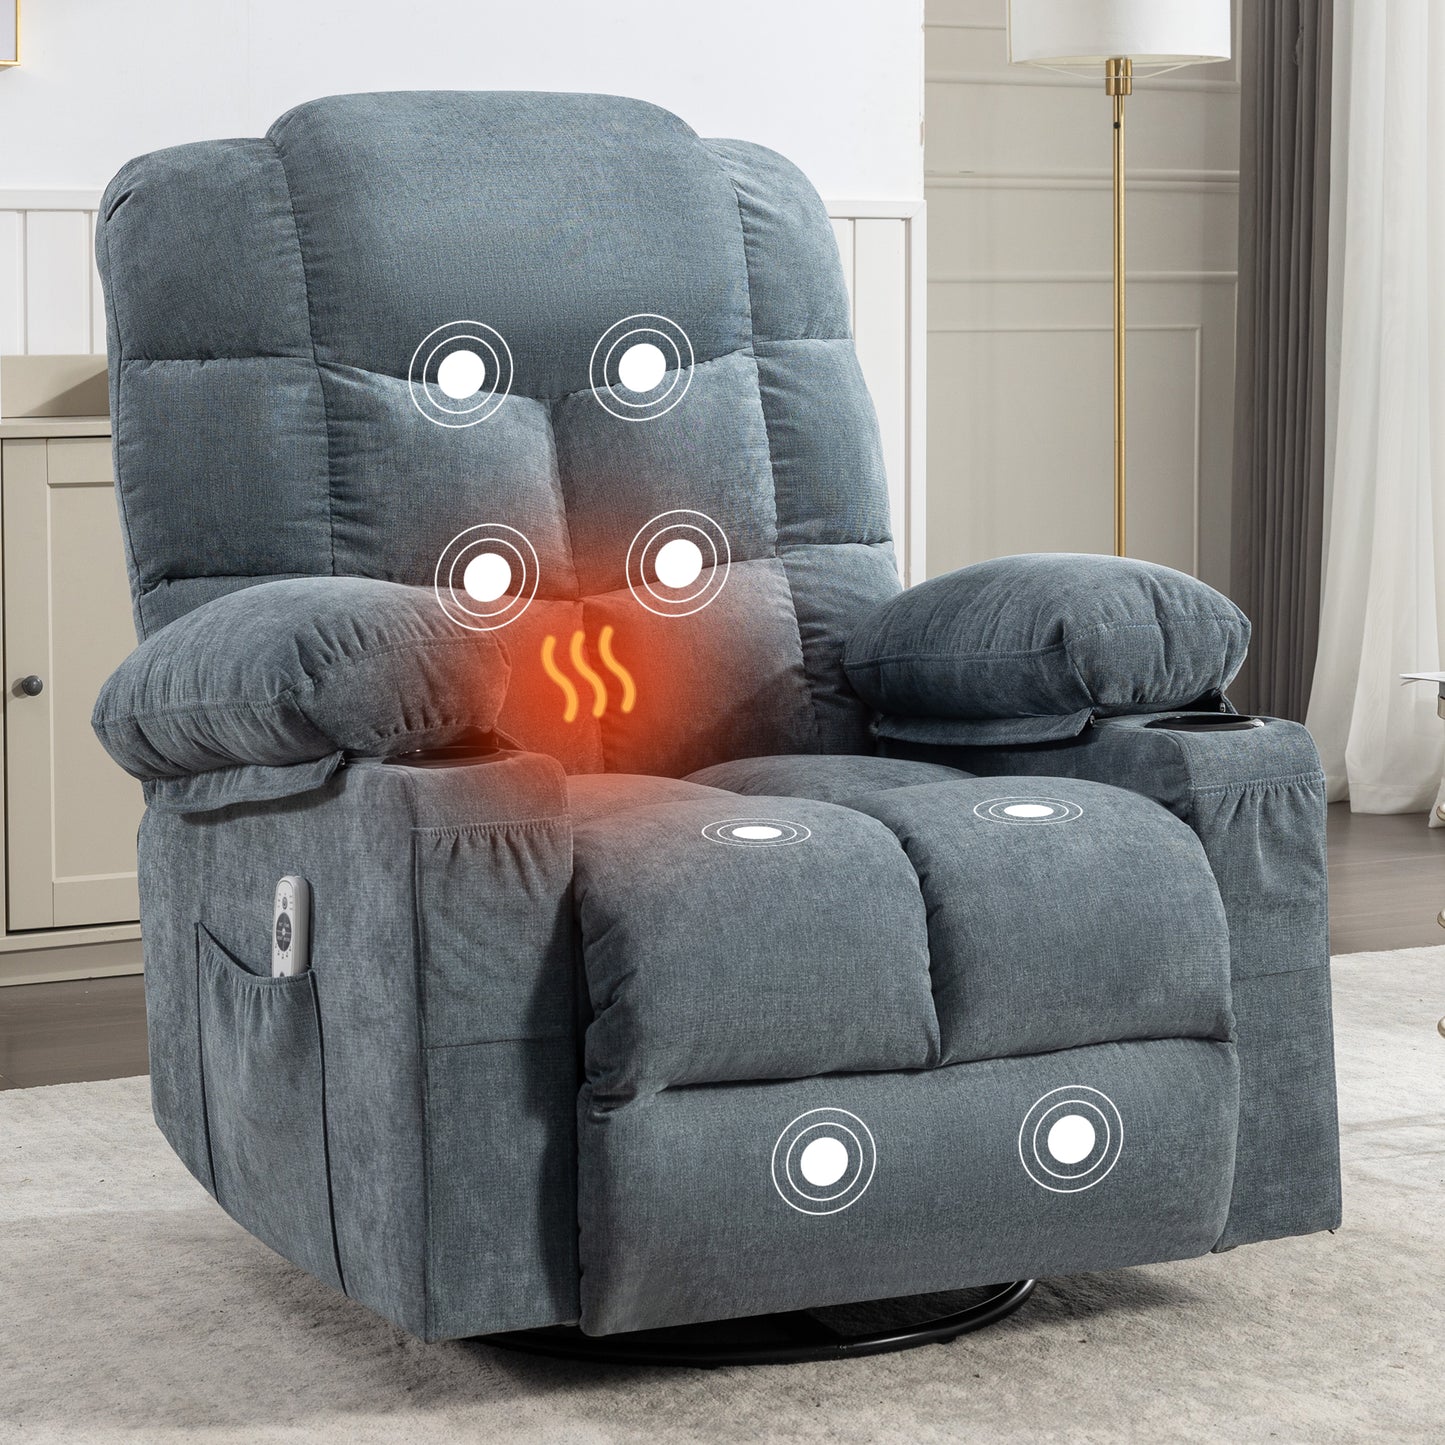 SYNGAR Rocker Recliner Chair for Living Room, Manual Recliner Chair with Heat and Massage Function, Cup Holders, USB, Oversized Recliner Rocking Sofa Swivel Glider Chair for Home Theater, Gray